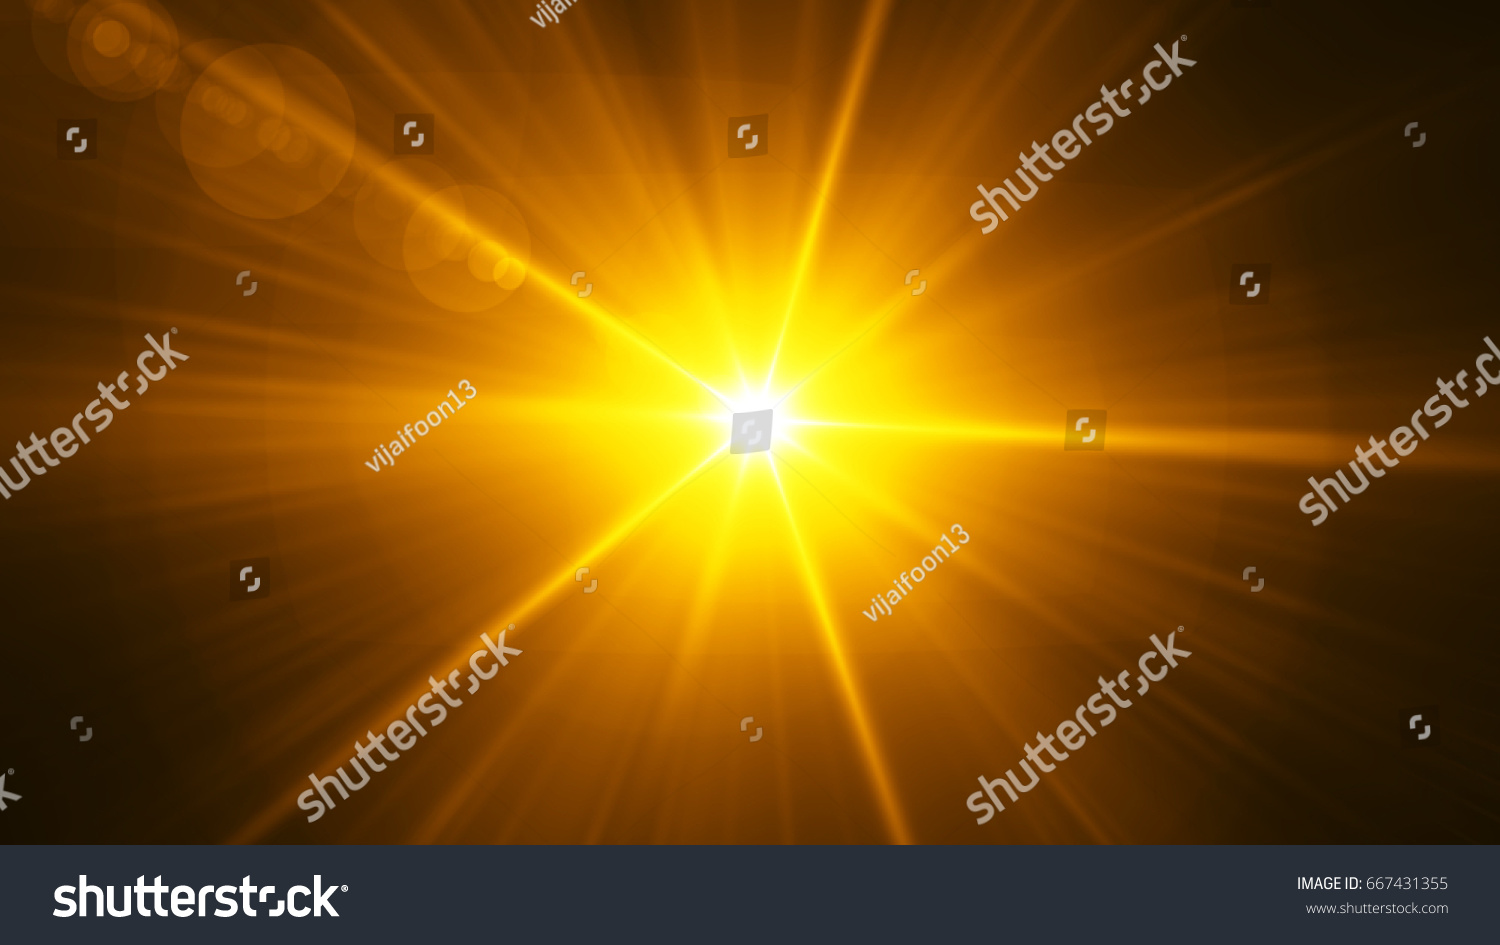 Realistic Lens Flare ,Sun Flare on black background object design. #667431355